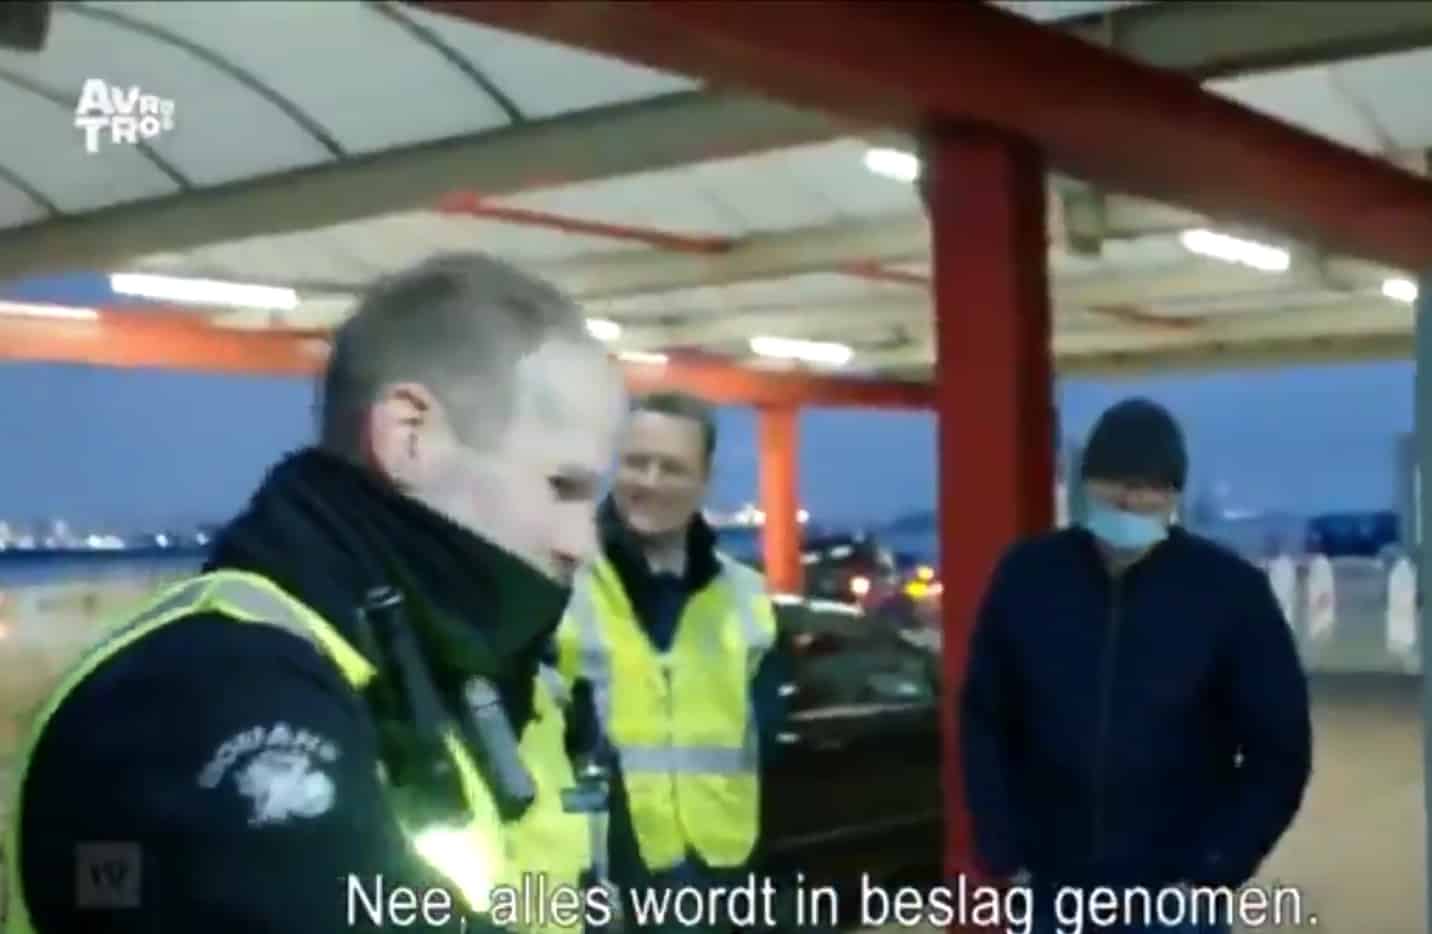 “Welcome to the Brexit, sir”: Customs officials confiscate ham sandwiches at Dutch border